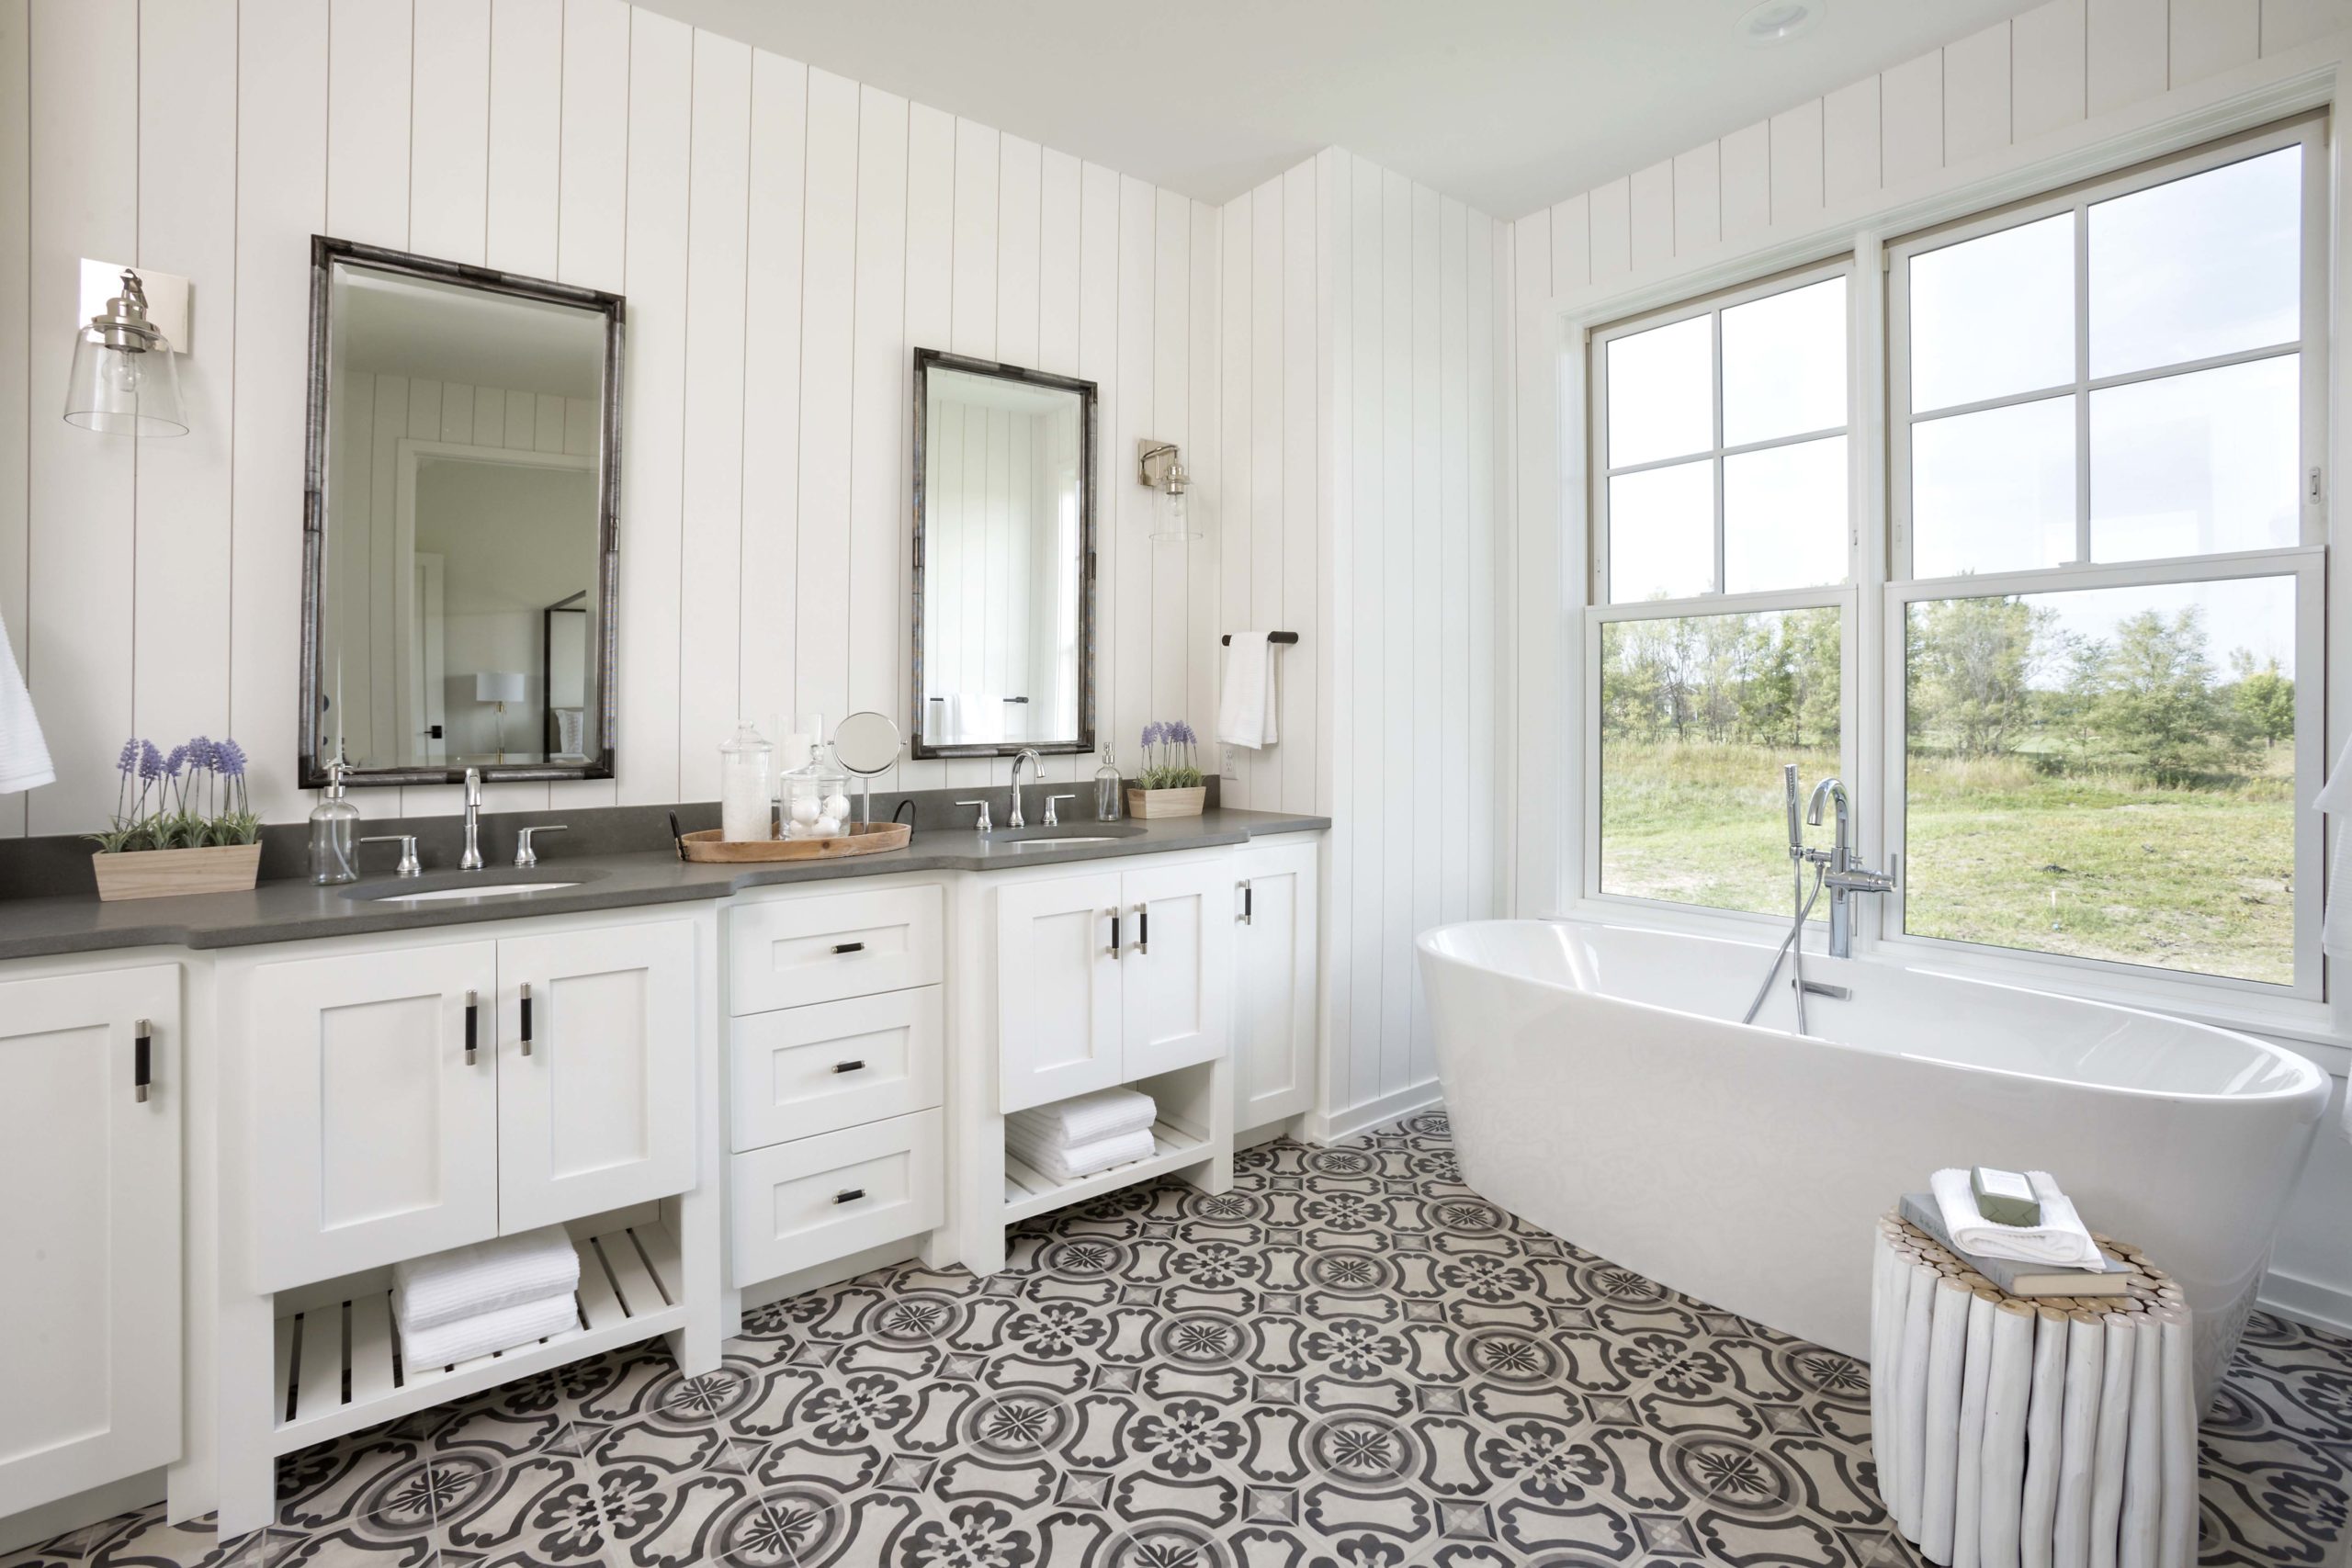 A farmhouse-style bathroom in Lakeville, Minnesota with a black and white tile floor.